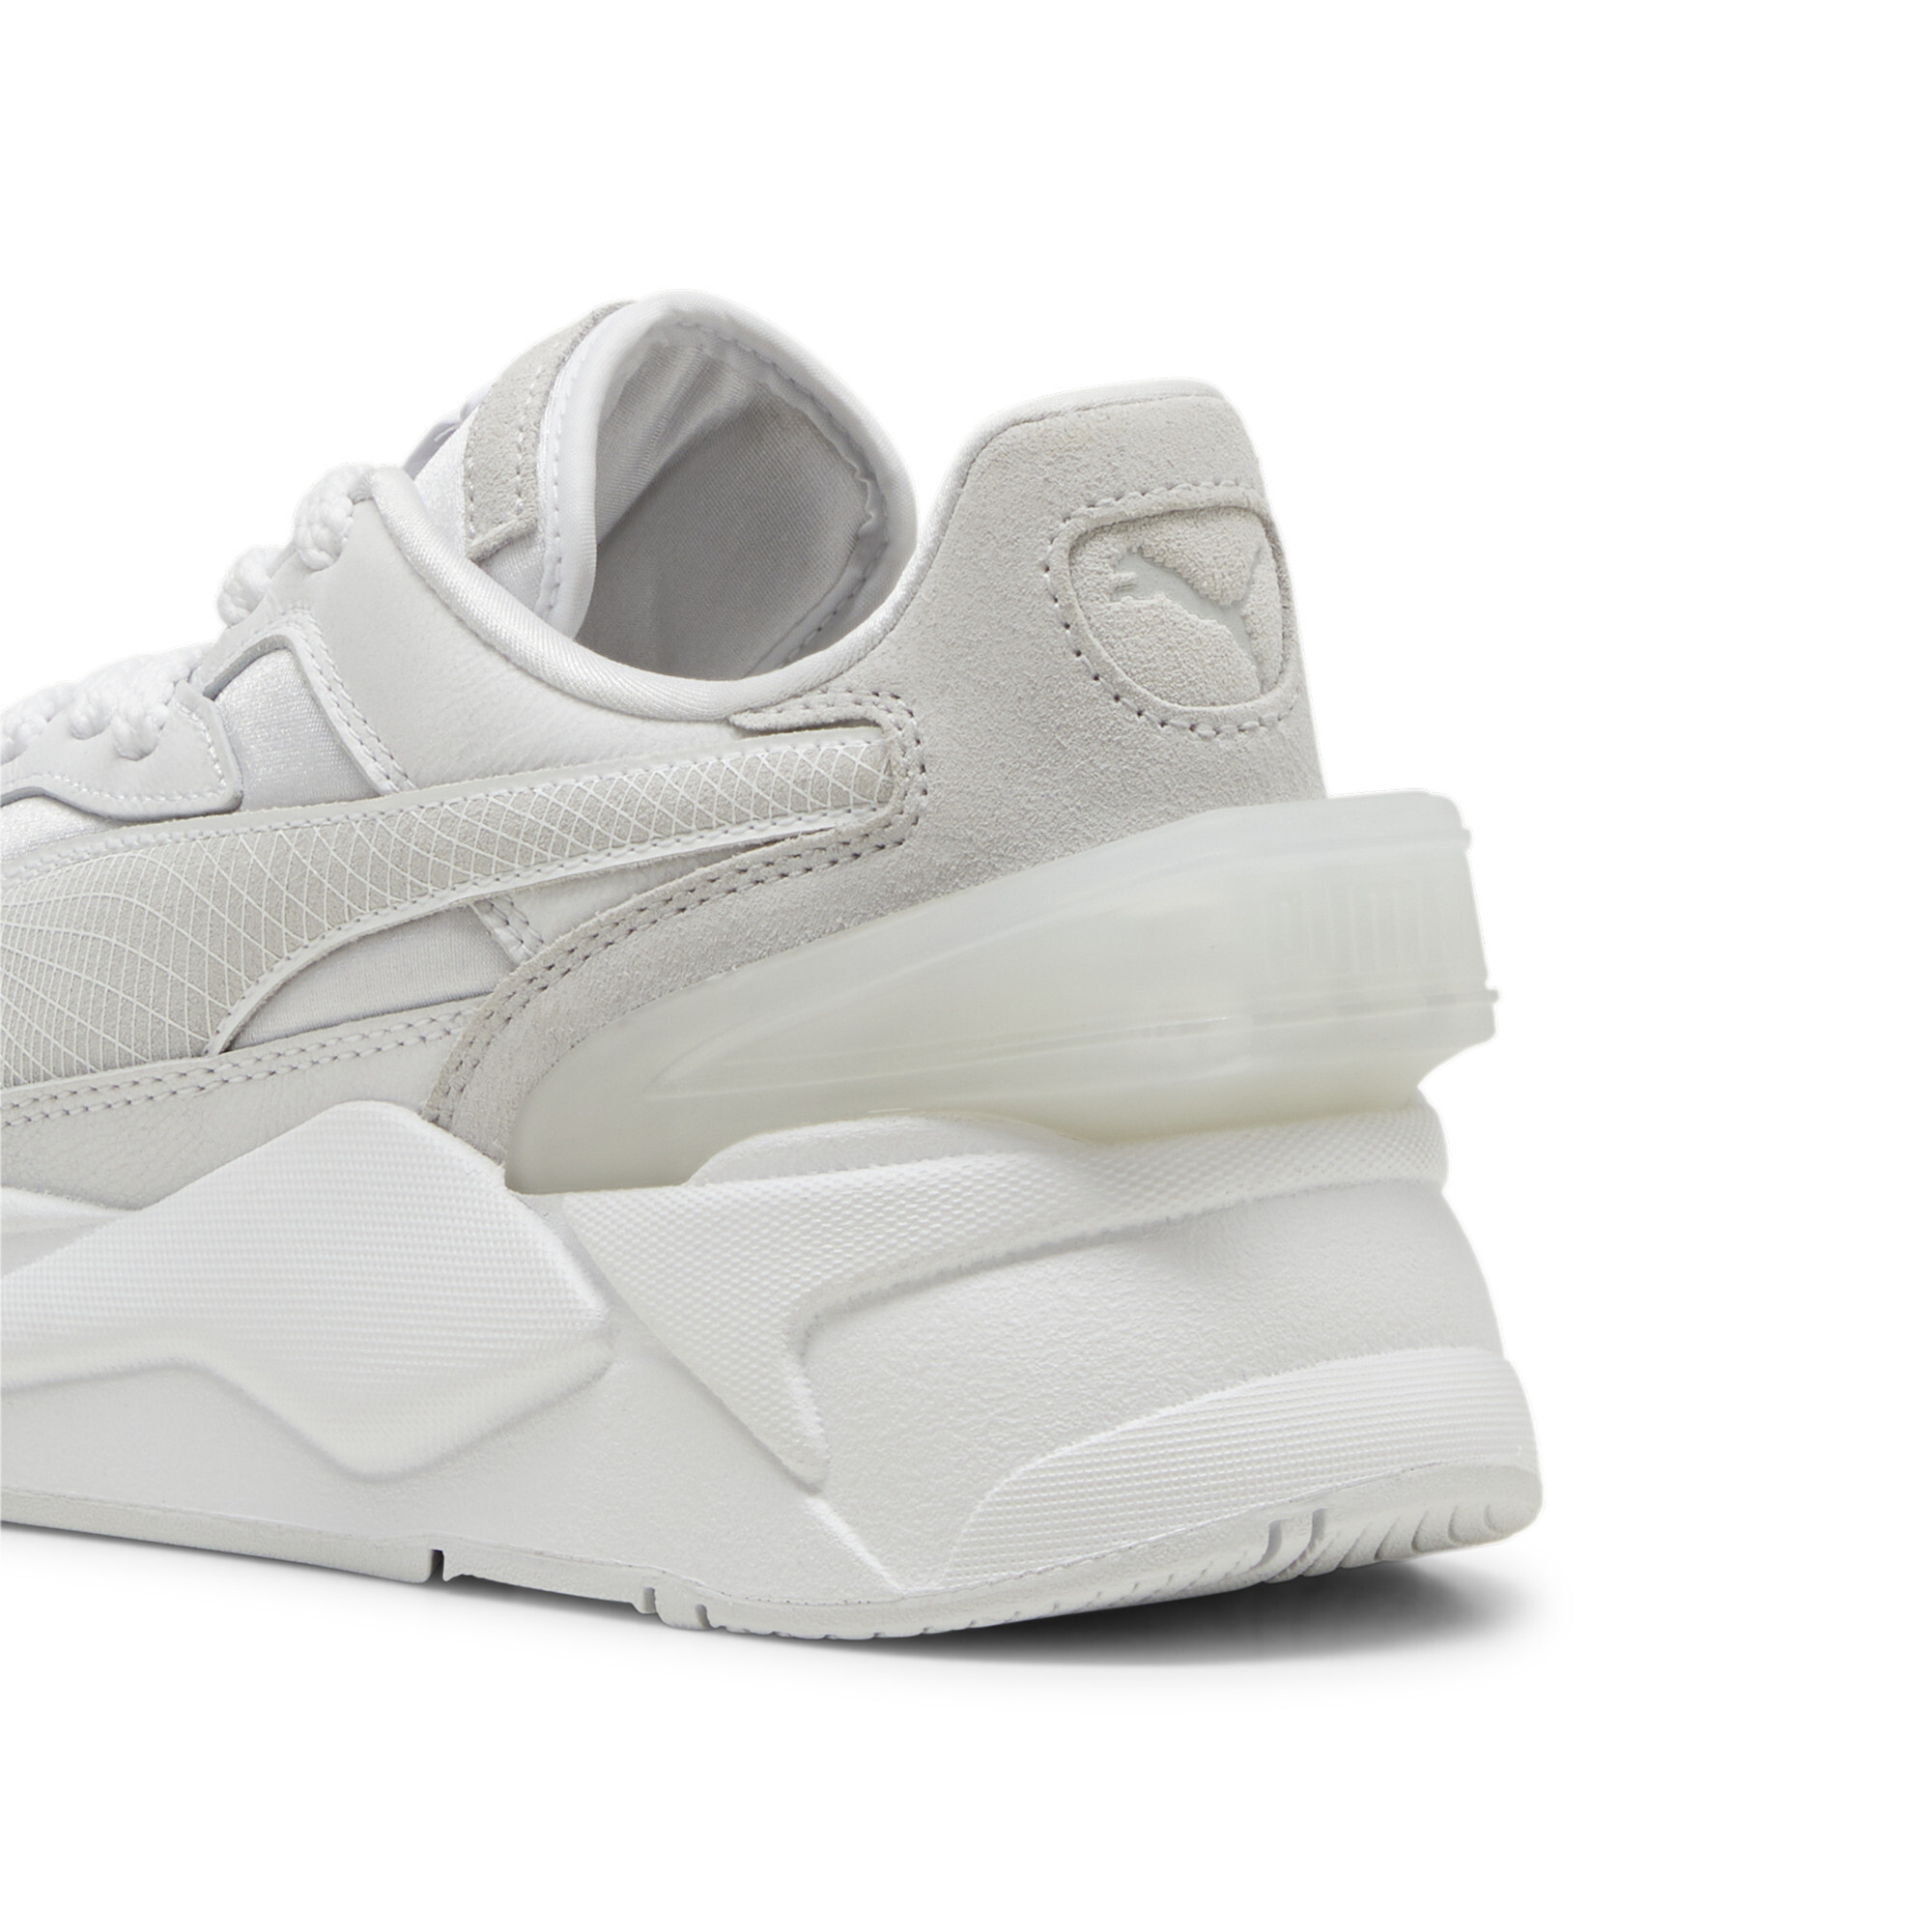 Puma RS-X 40th Anniversary Sneakers, White, Size 38, Shoes